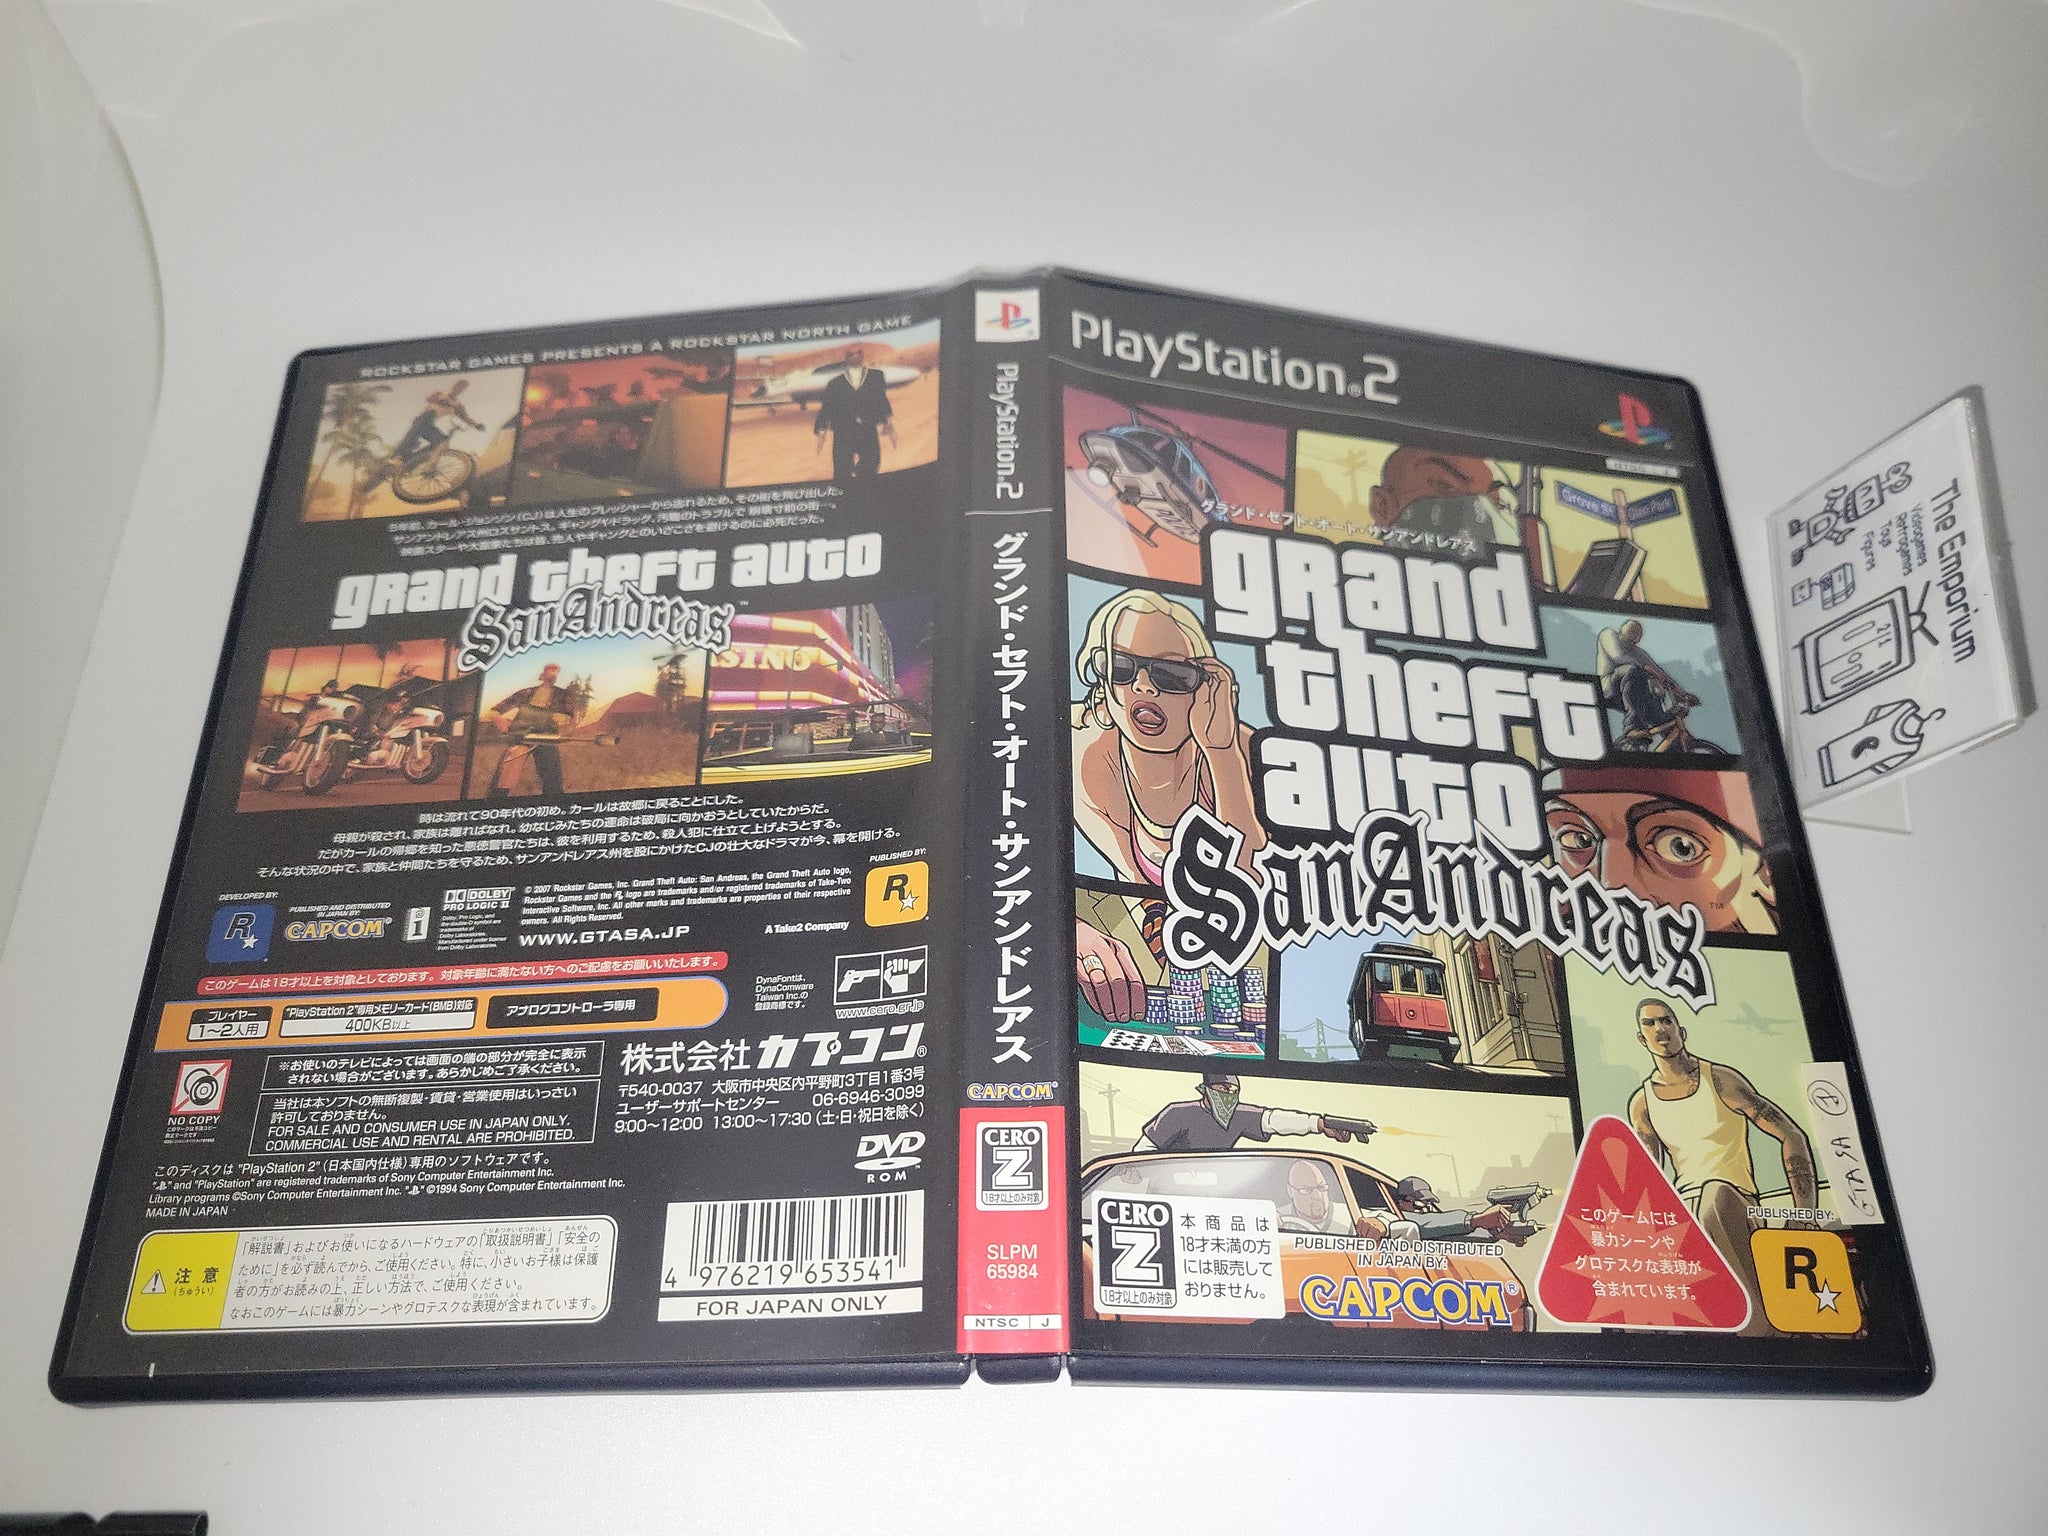 Grand Theft Auto - San Andreas Sony PlayStation 2 (PS2) ROM / ISO Download  - Rom Hustler